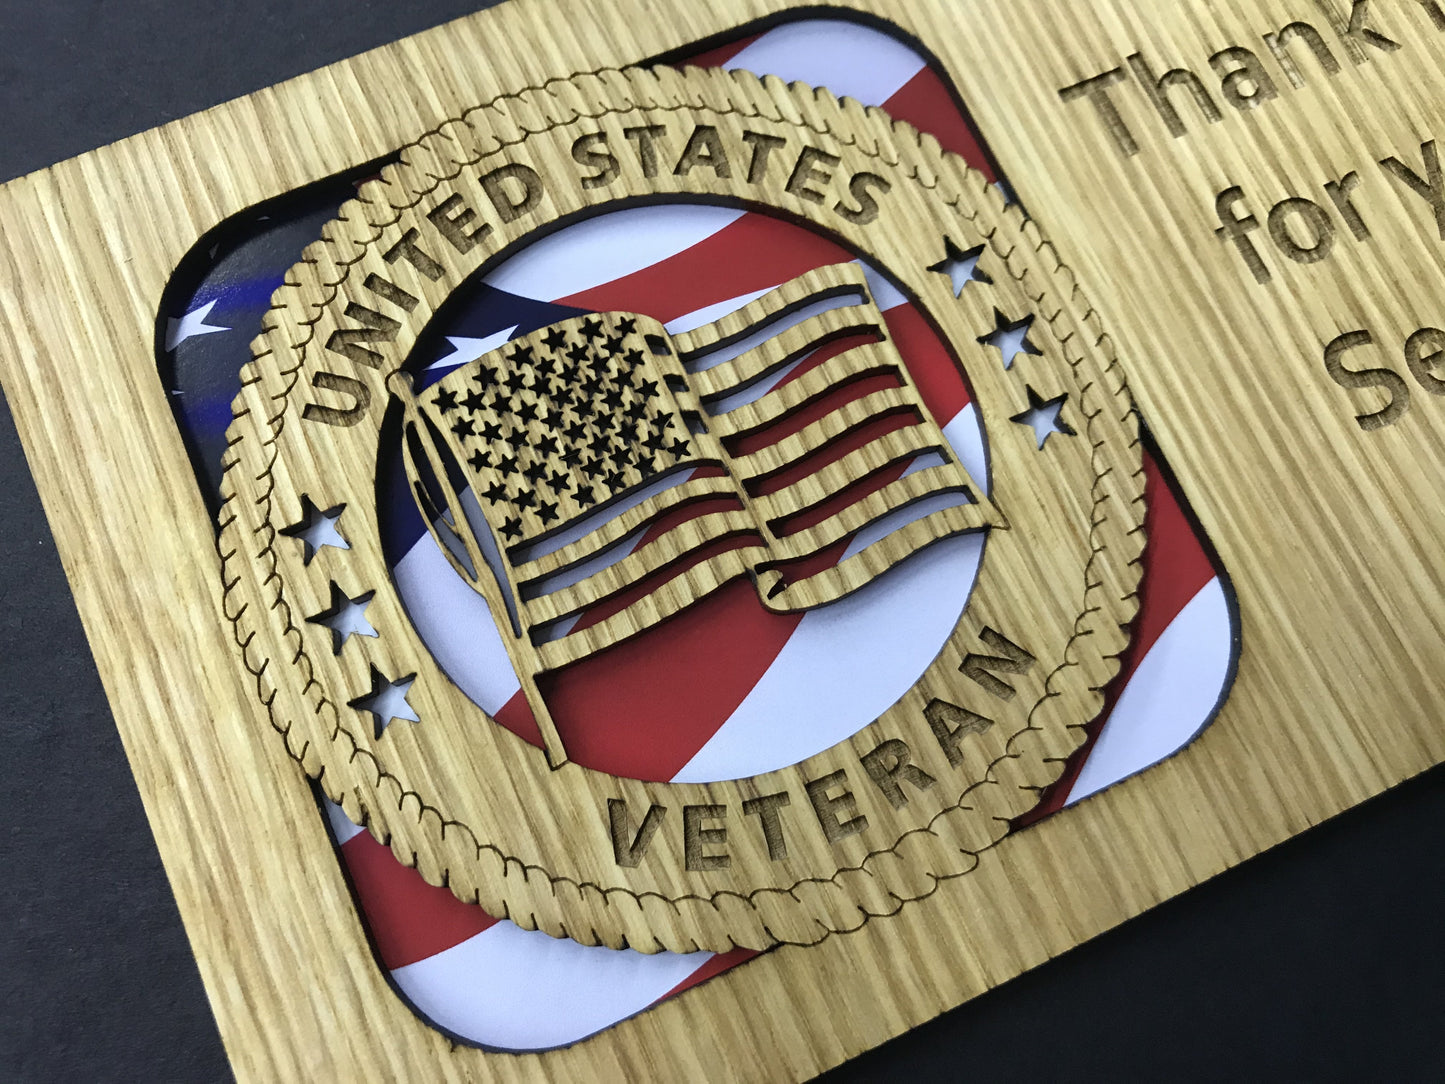 US Veteran Picture Frame - 8x10 Frame Holds a 5x7 Photo